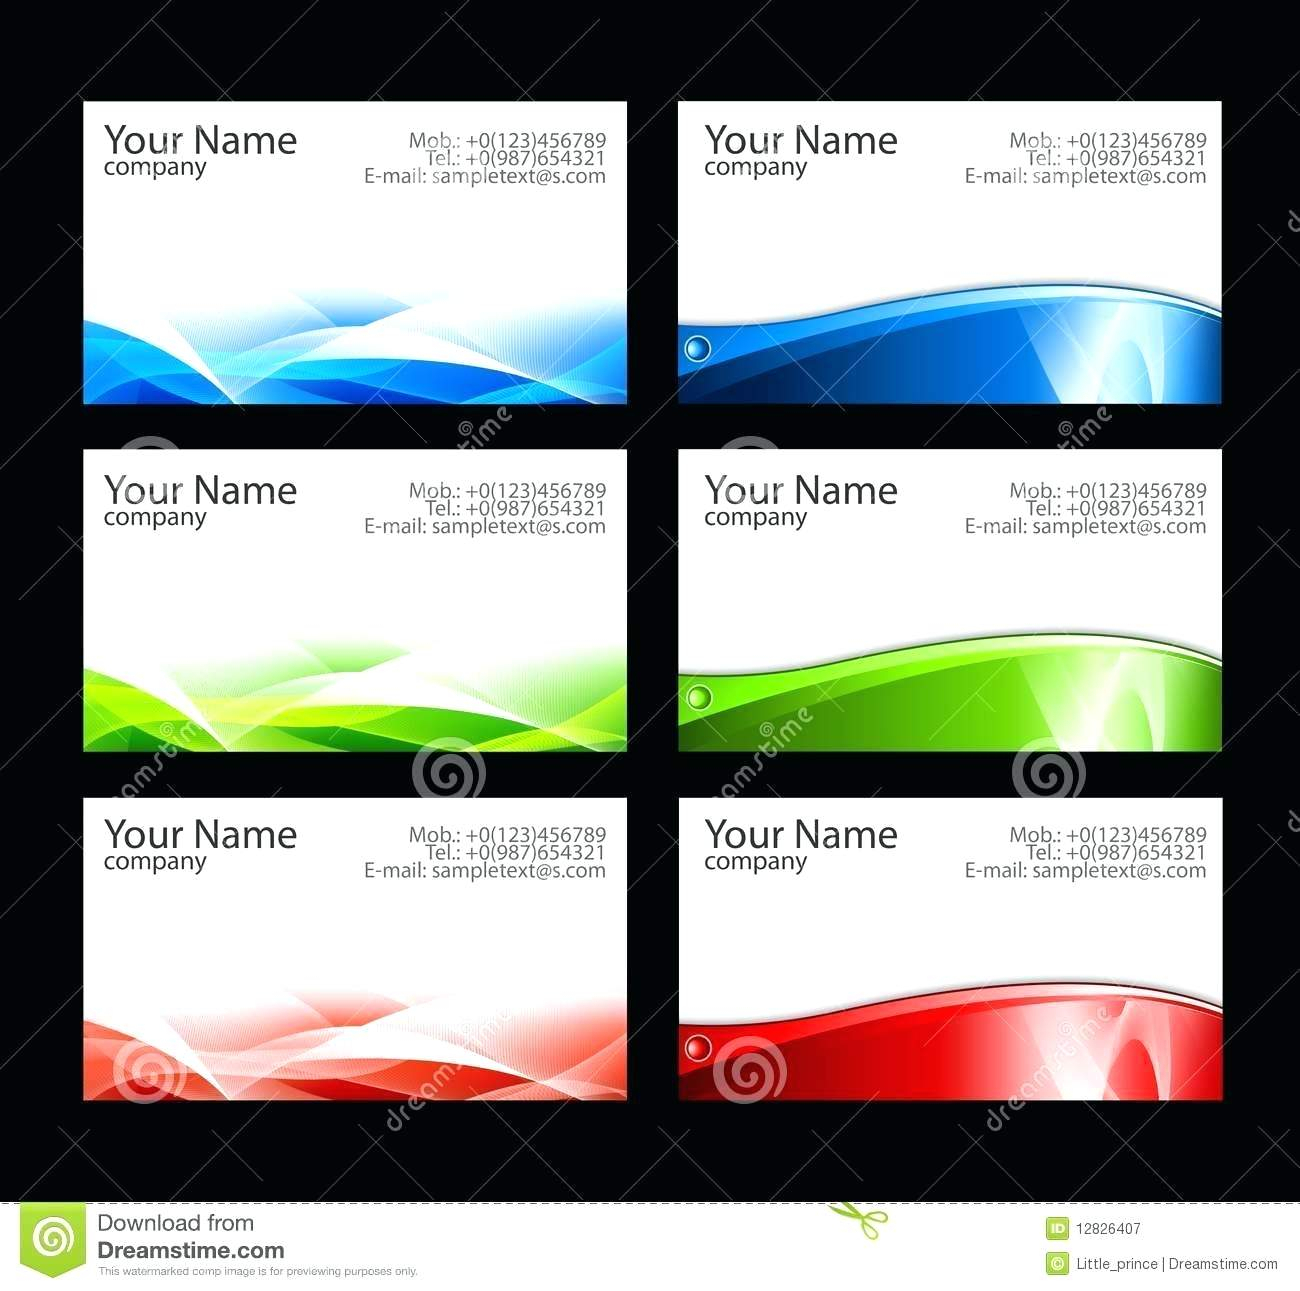 Business Card Template For Microsoft Word – Wepage.co Intended For Microsoft Templates For Business Cards